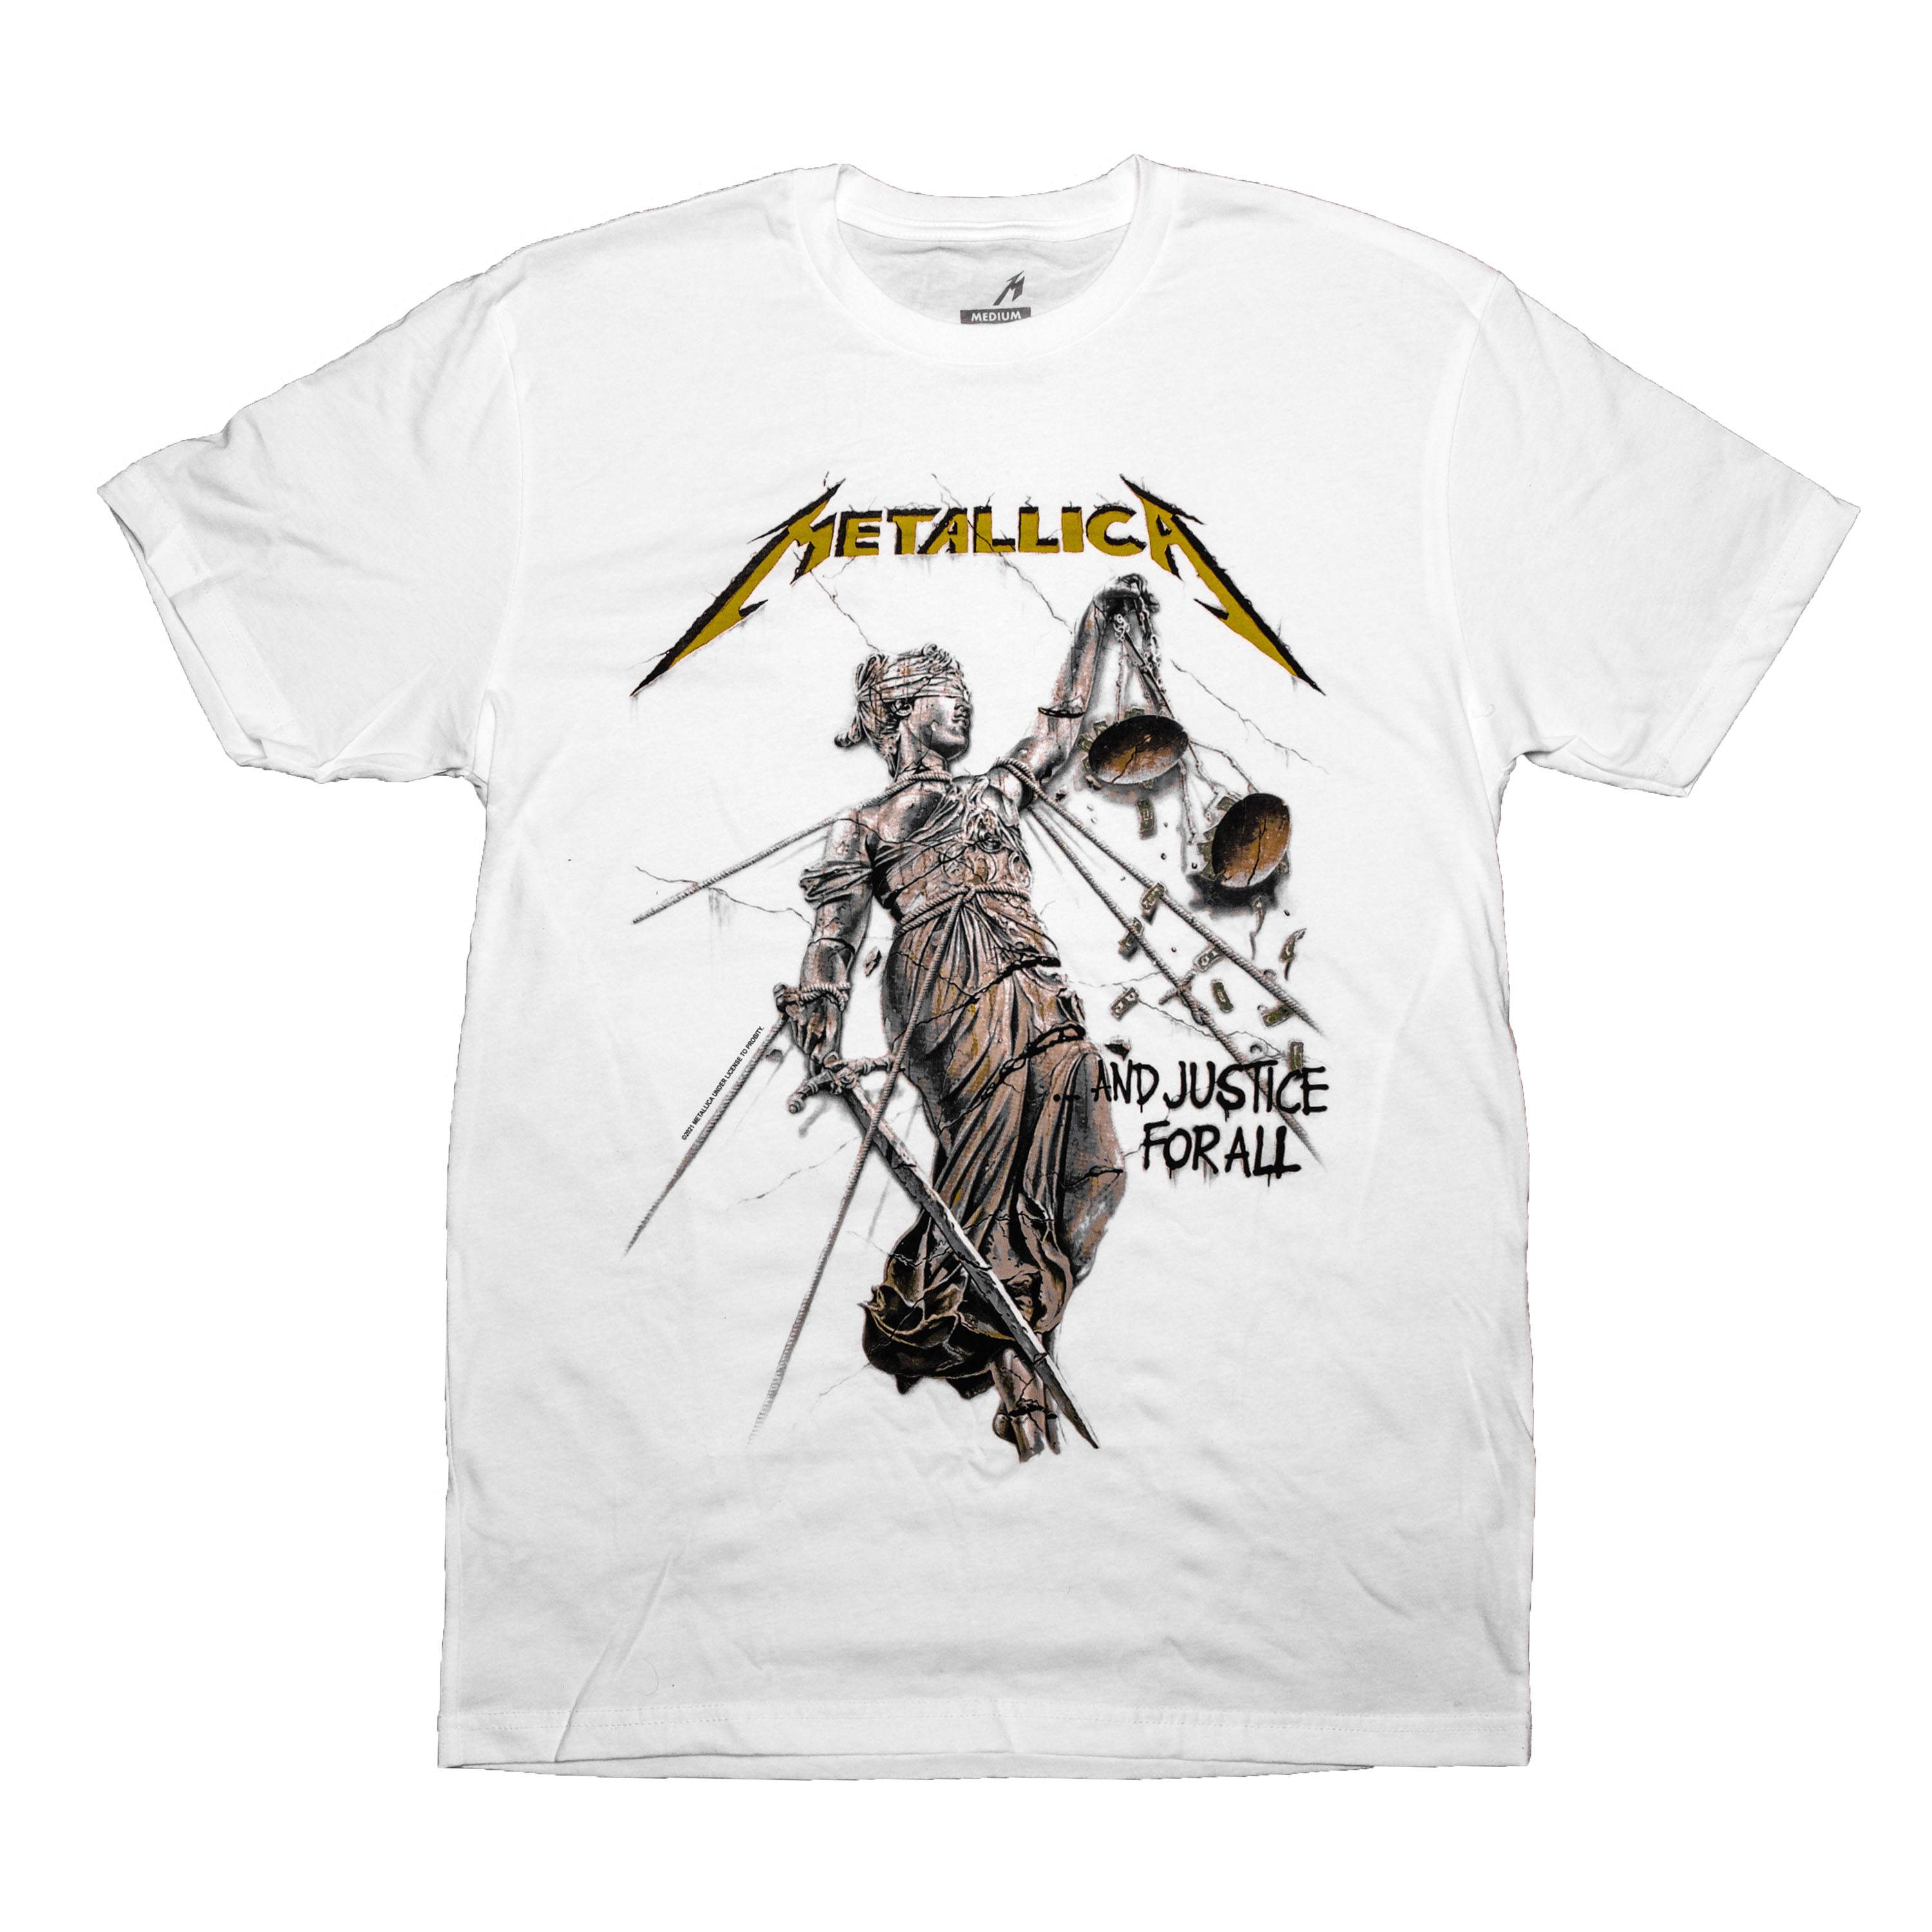 SML-3XL badhabitmerch New Metallica And Justice For All Album Cover Band Shirt